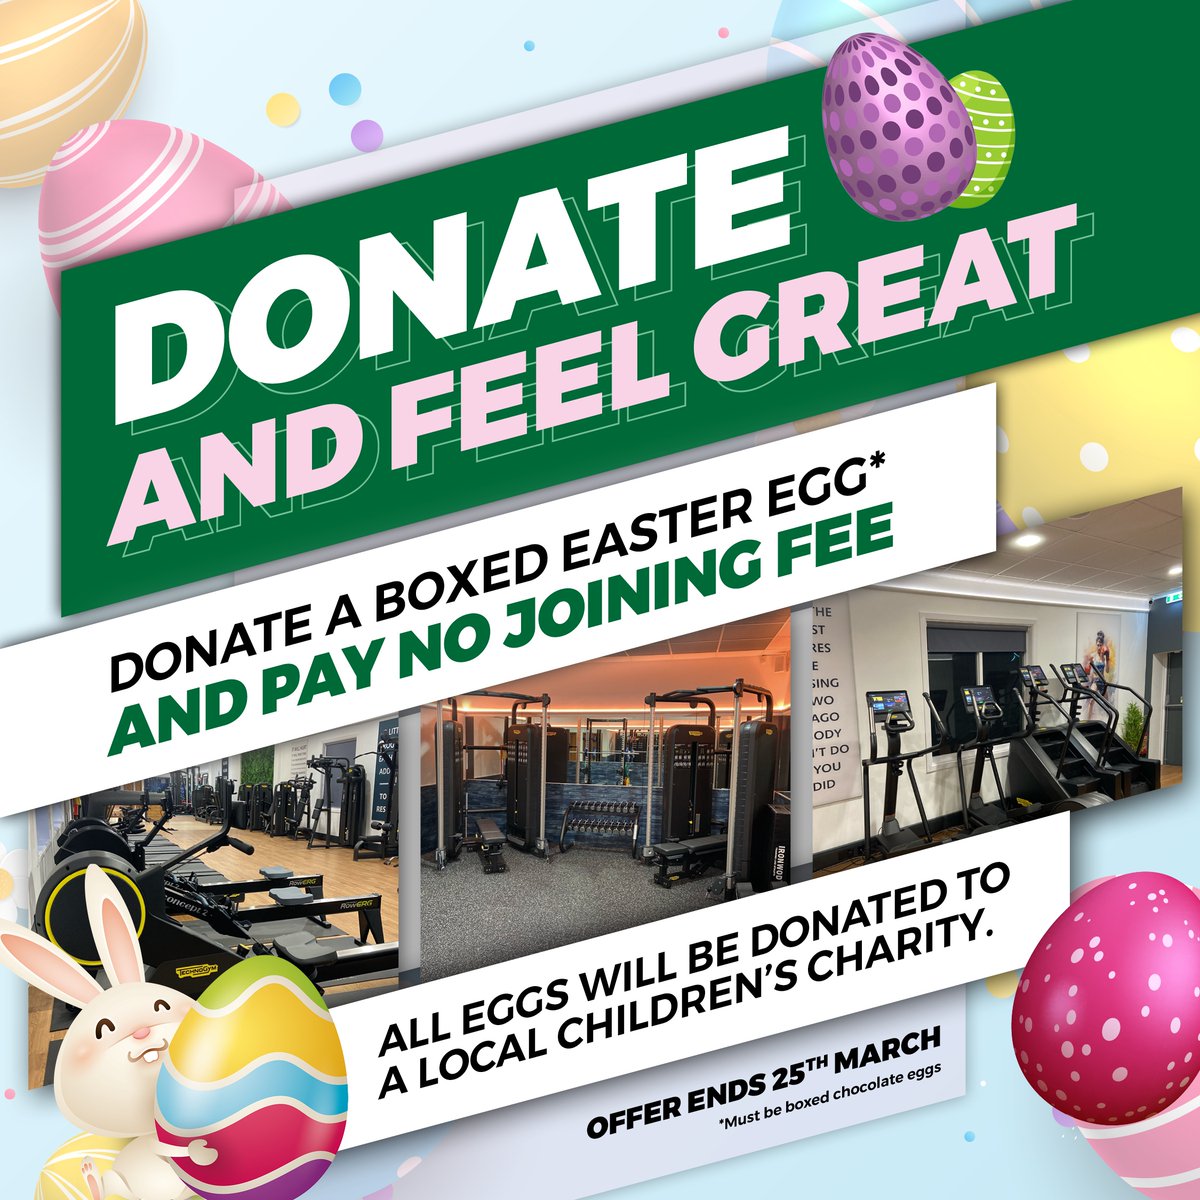 There are only a few days left to bring in your boxed eggs to add to our Easter Egg collection! 🐣 Simply drop your eggs at reception and we'll do the rest!